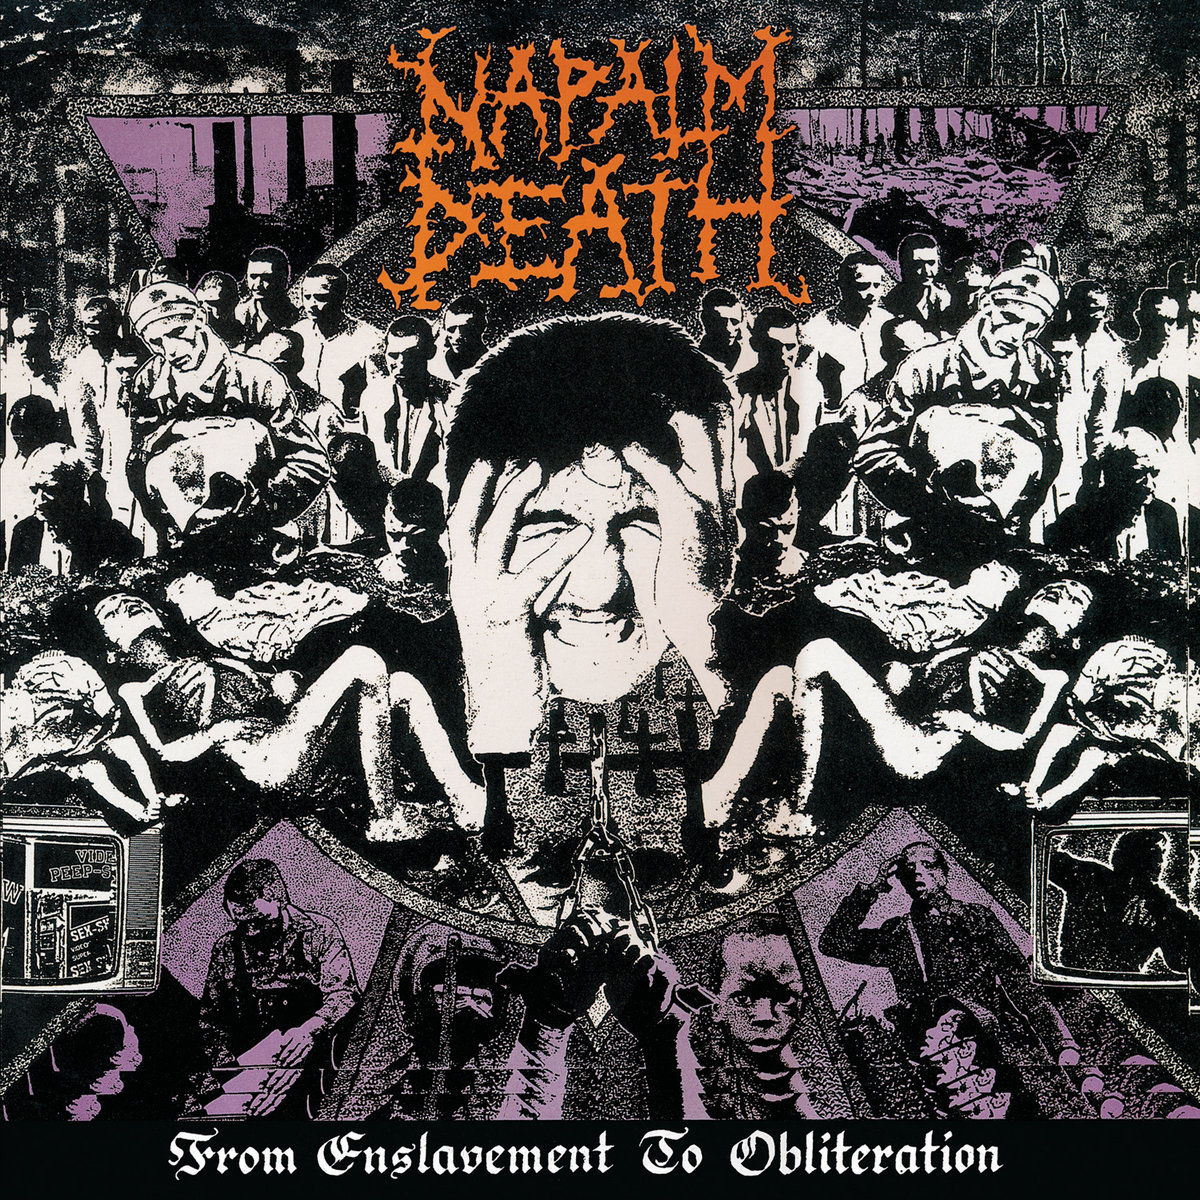 Napalm Death (Great Britain 🇬🇧) - 'From Enslavement to Obliteration' was released' was released 32 years ago on this day. How do you rate this album?
#napalmdeath #fromenslavementtoobliteration #leedorrian #grindcore  #deathmetal